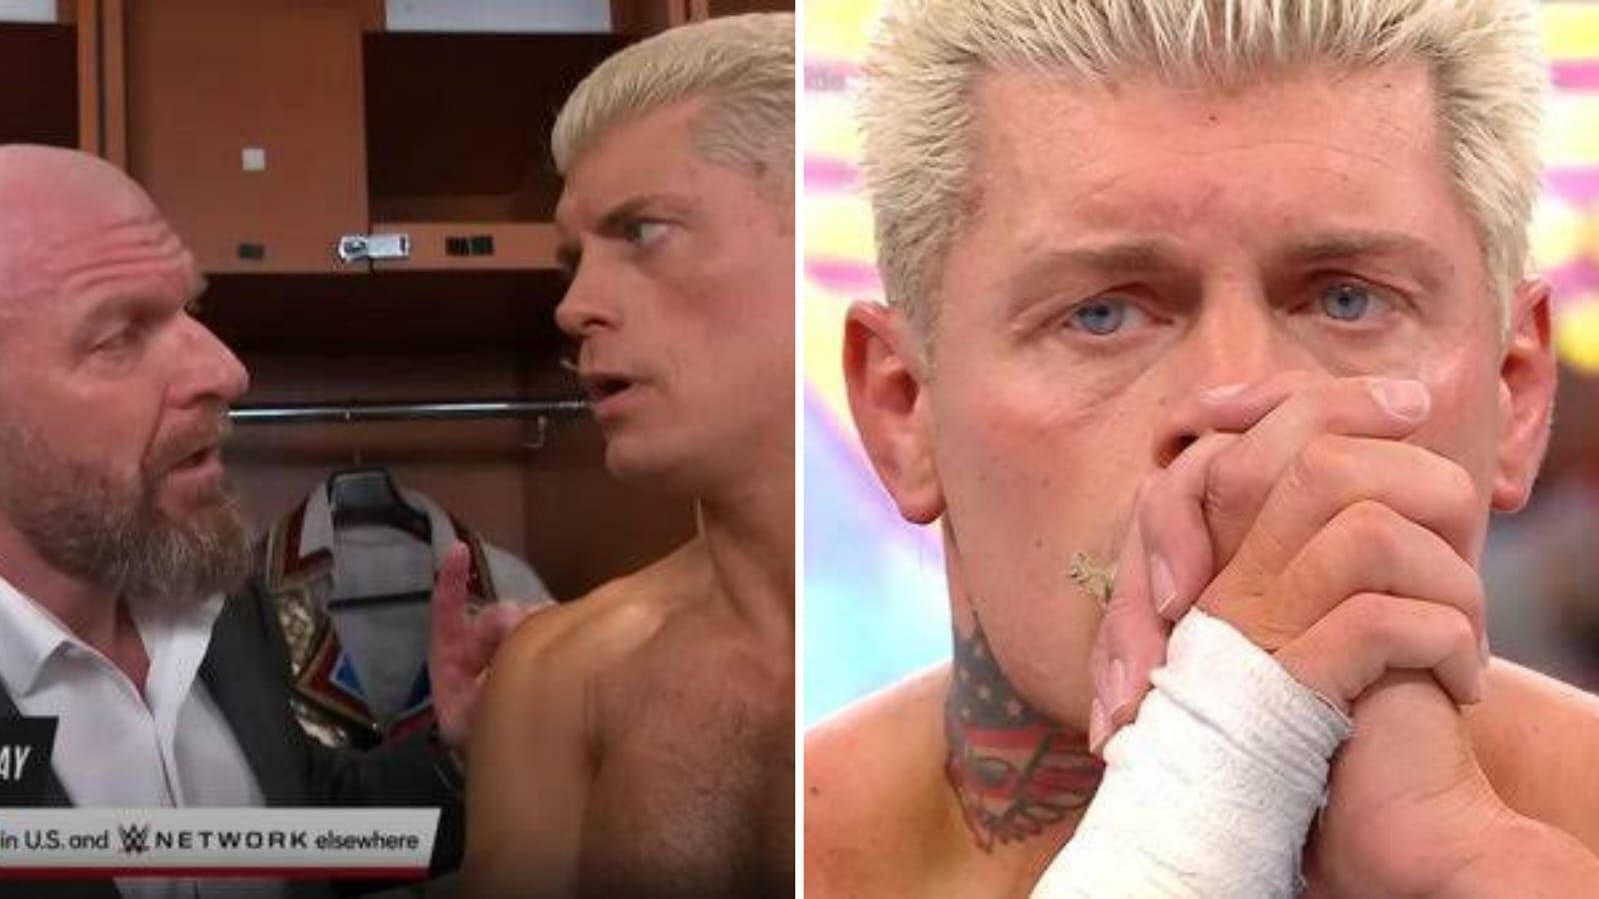 Cody Rhodes and Triple H had a surprise interaction on RAW this week.